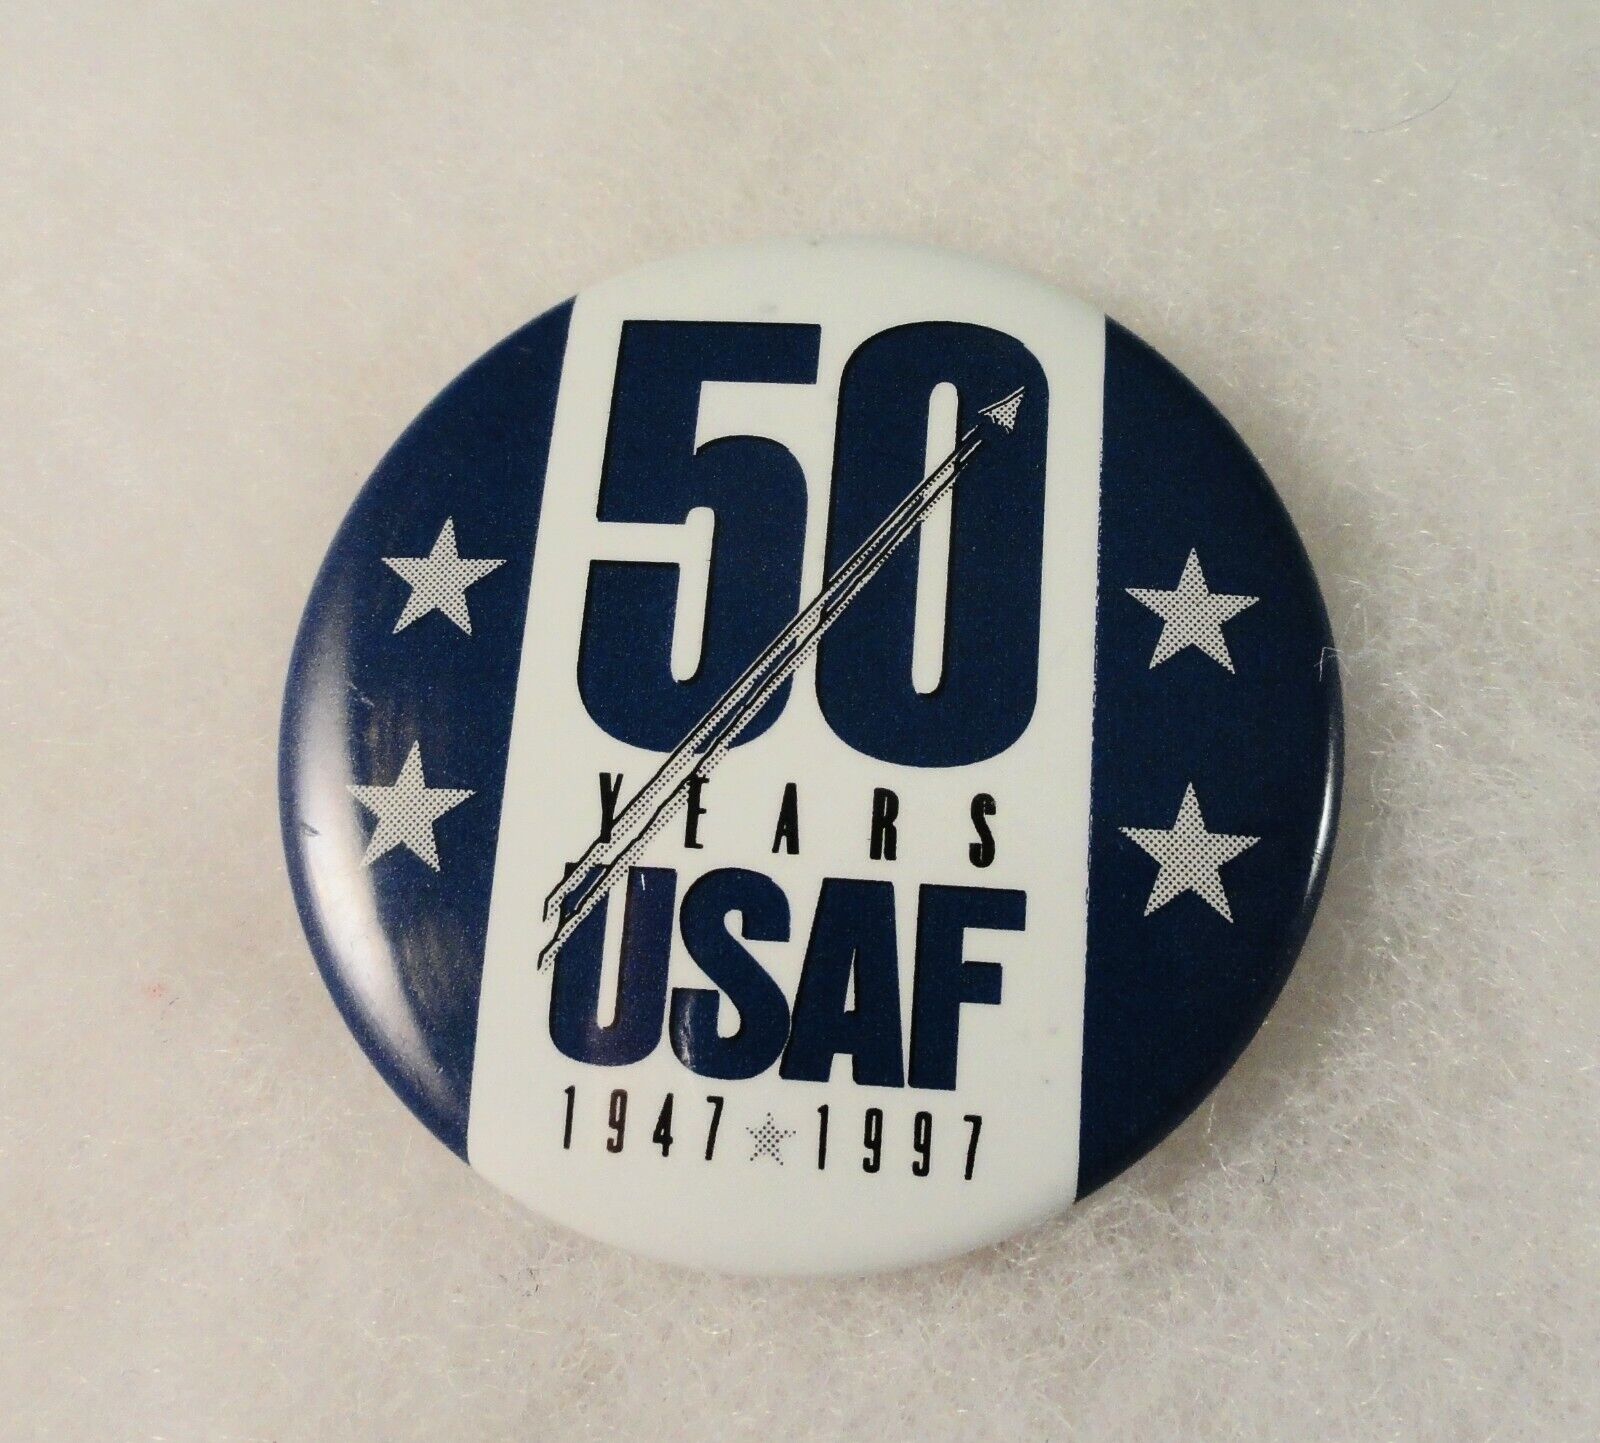 Old USAF United States Air Force 50 Years Pinback Button 1947 - 1997